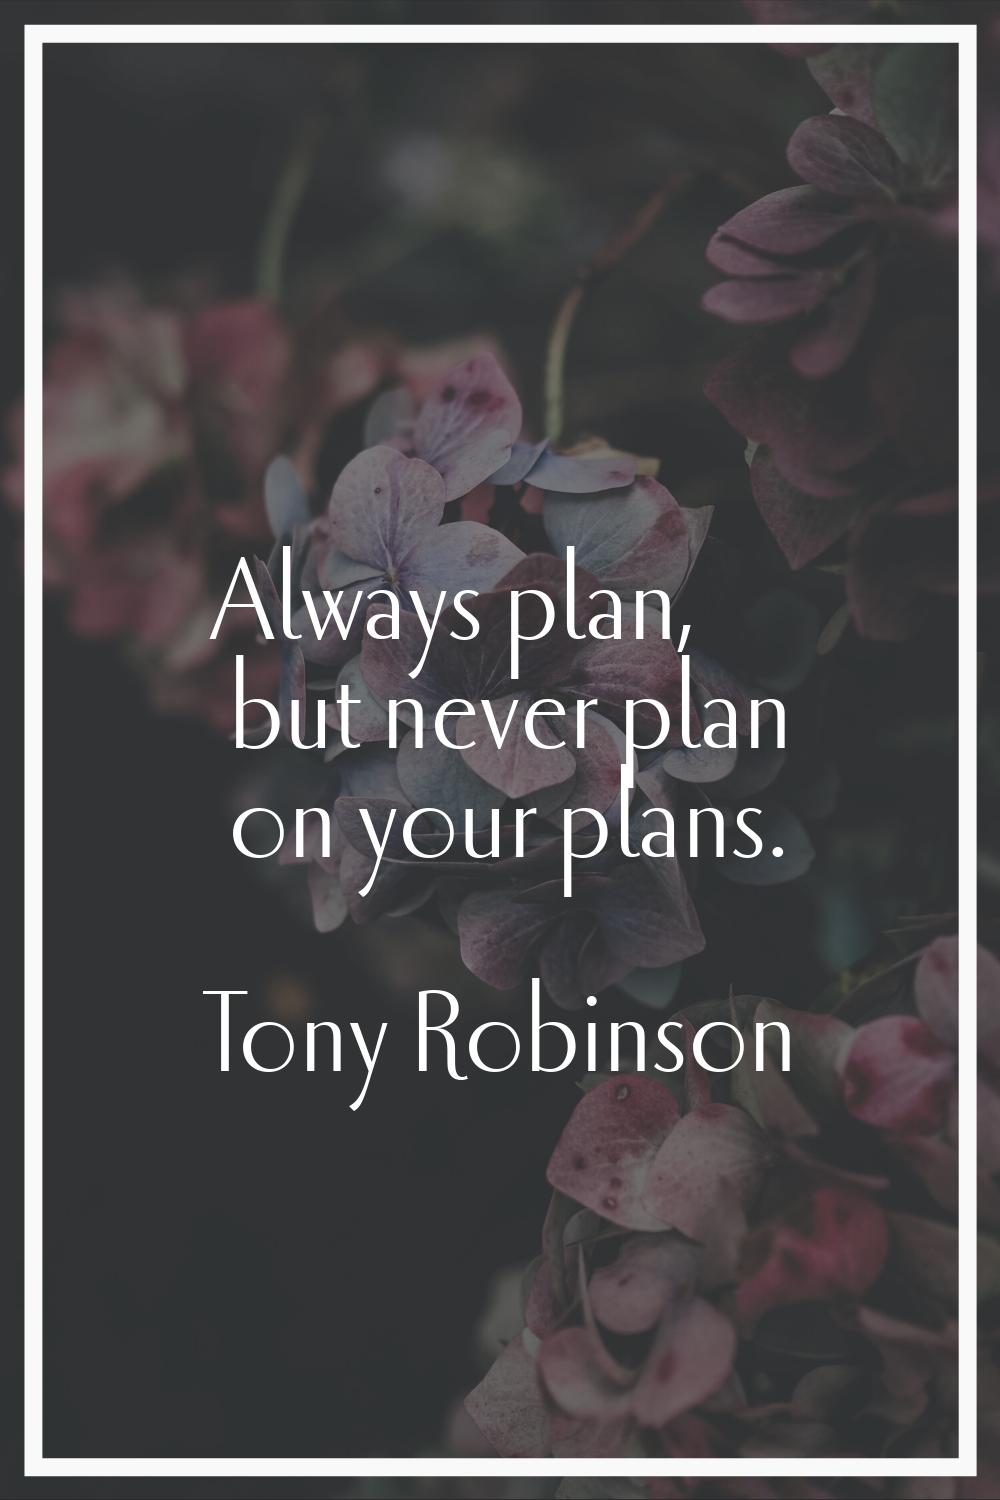 Always plan, but never plan on your plans.